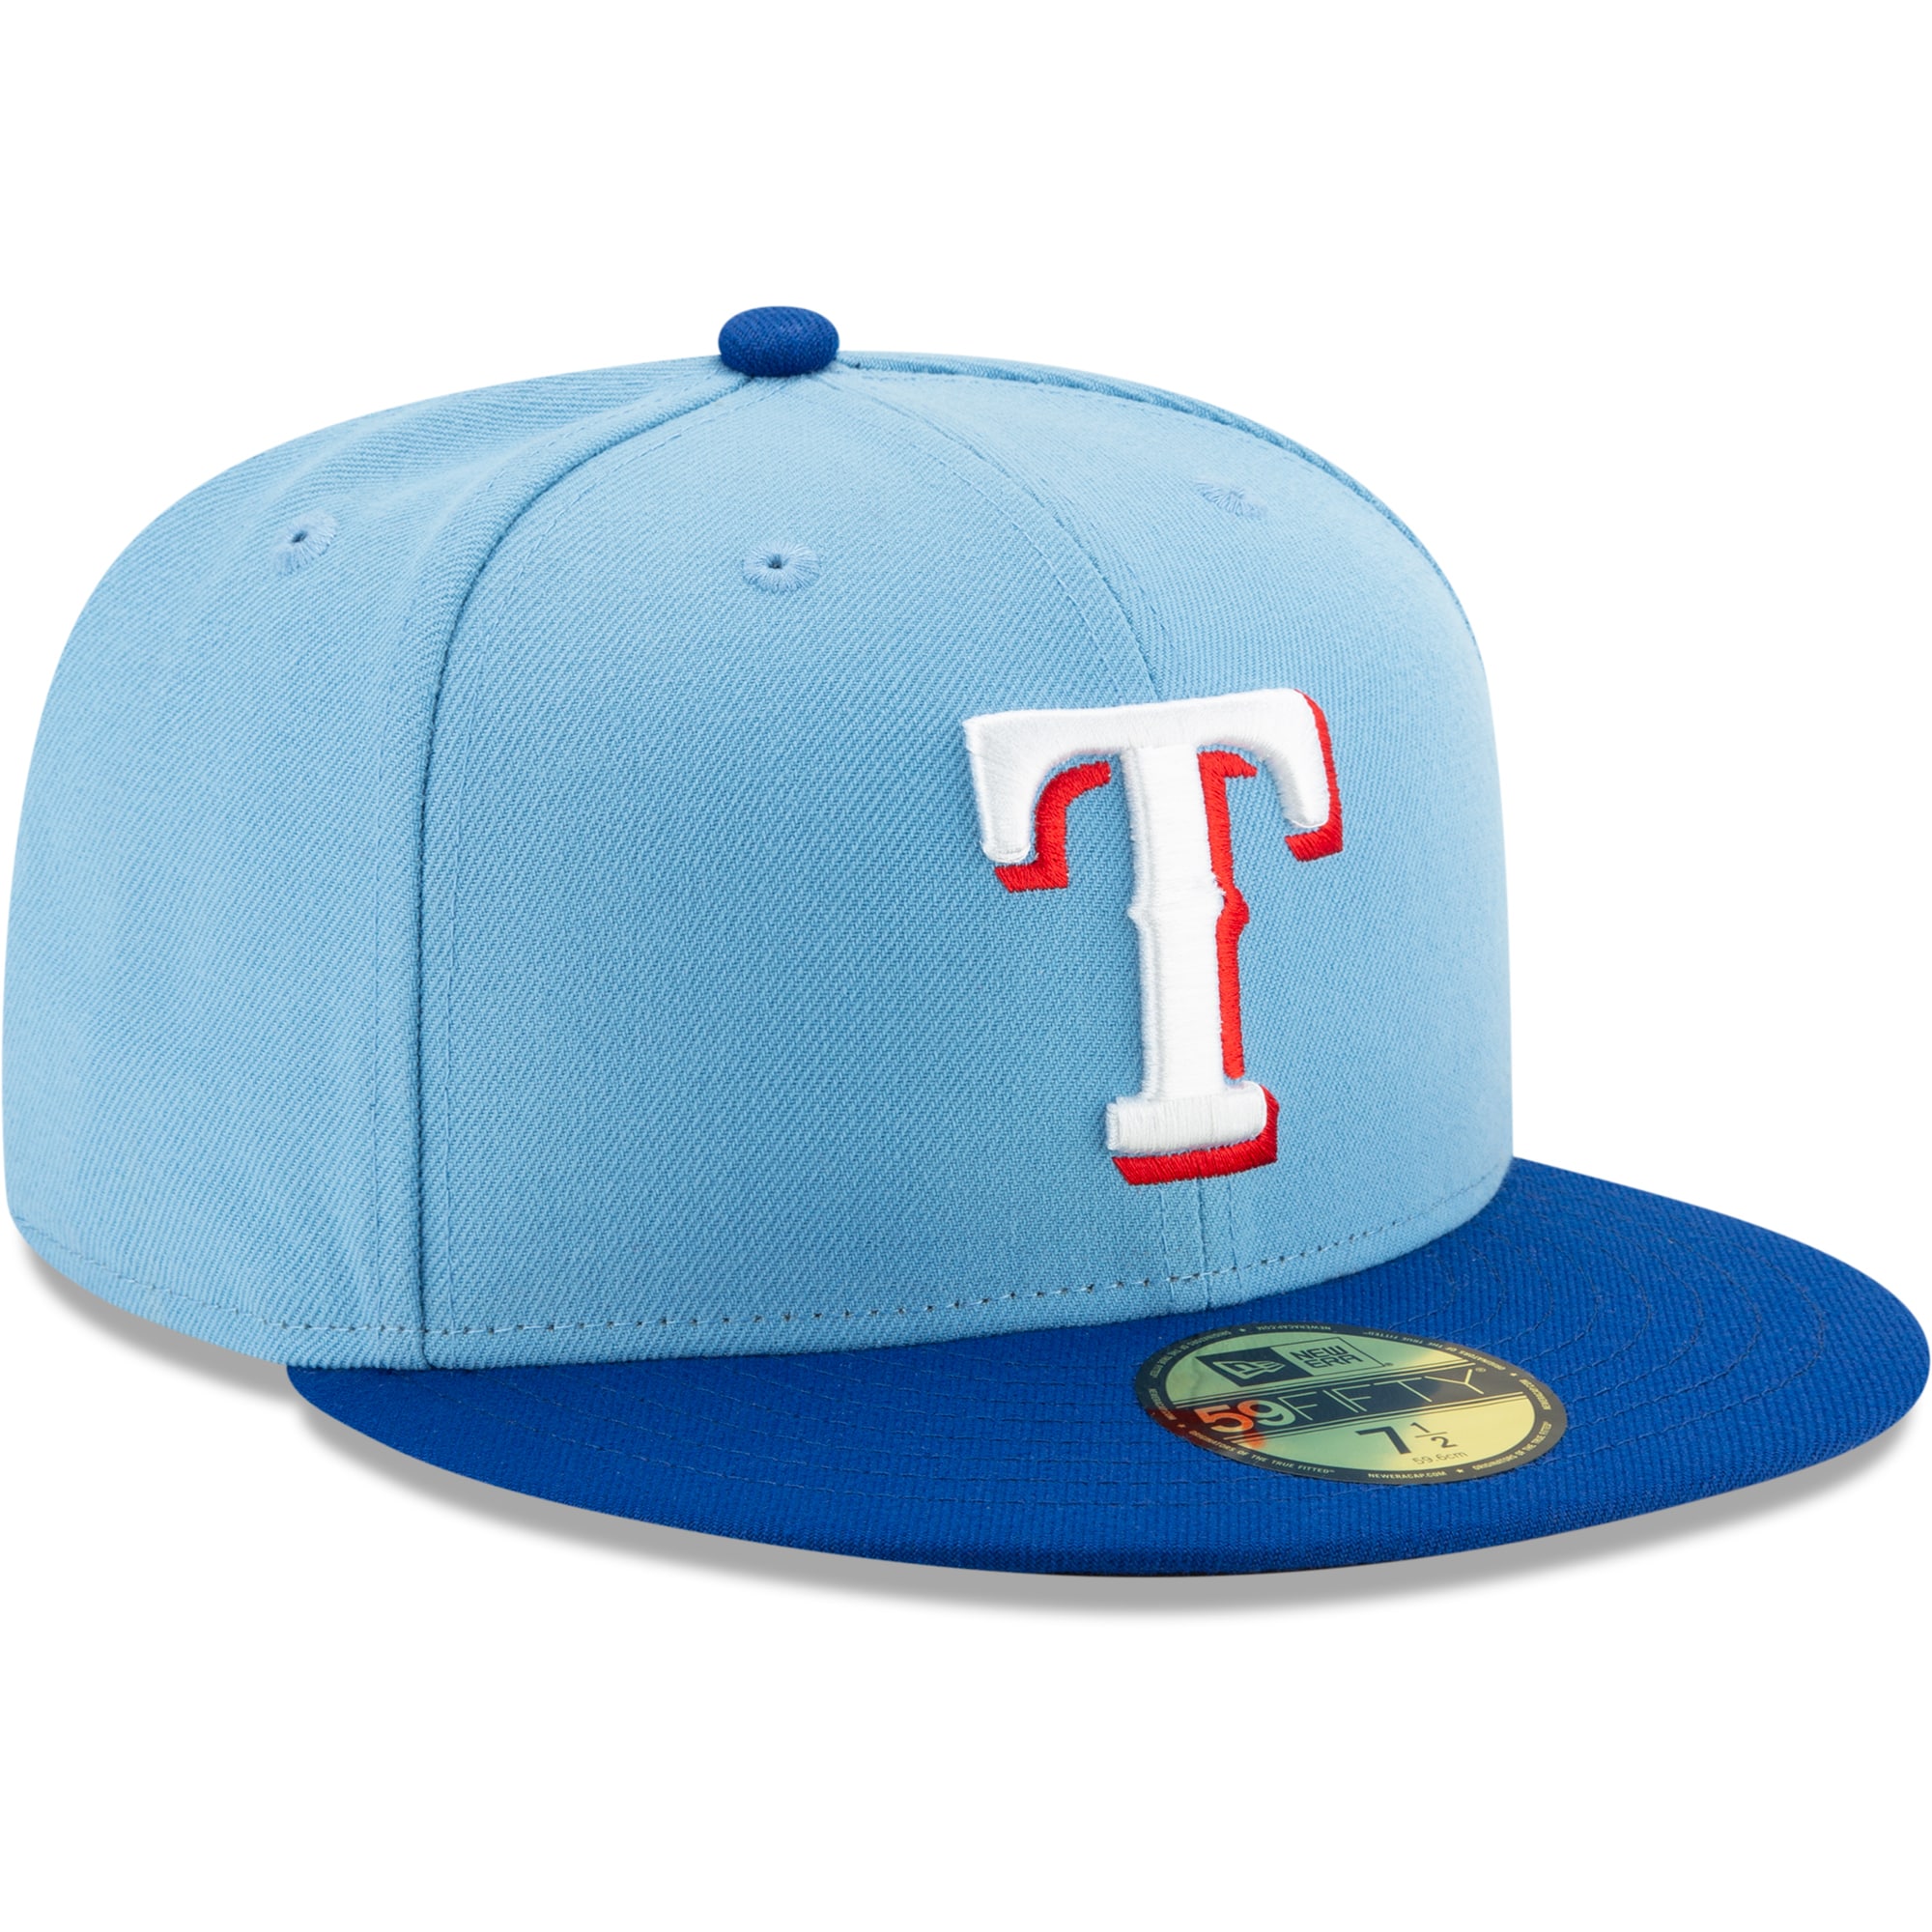 Men's New Era Texas Rangers Light Blue/Royal On-Field Authentic Collection 59FIFTY Fitted Hat - image 3 of 4